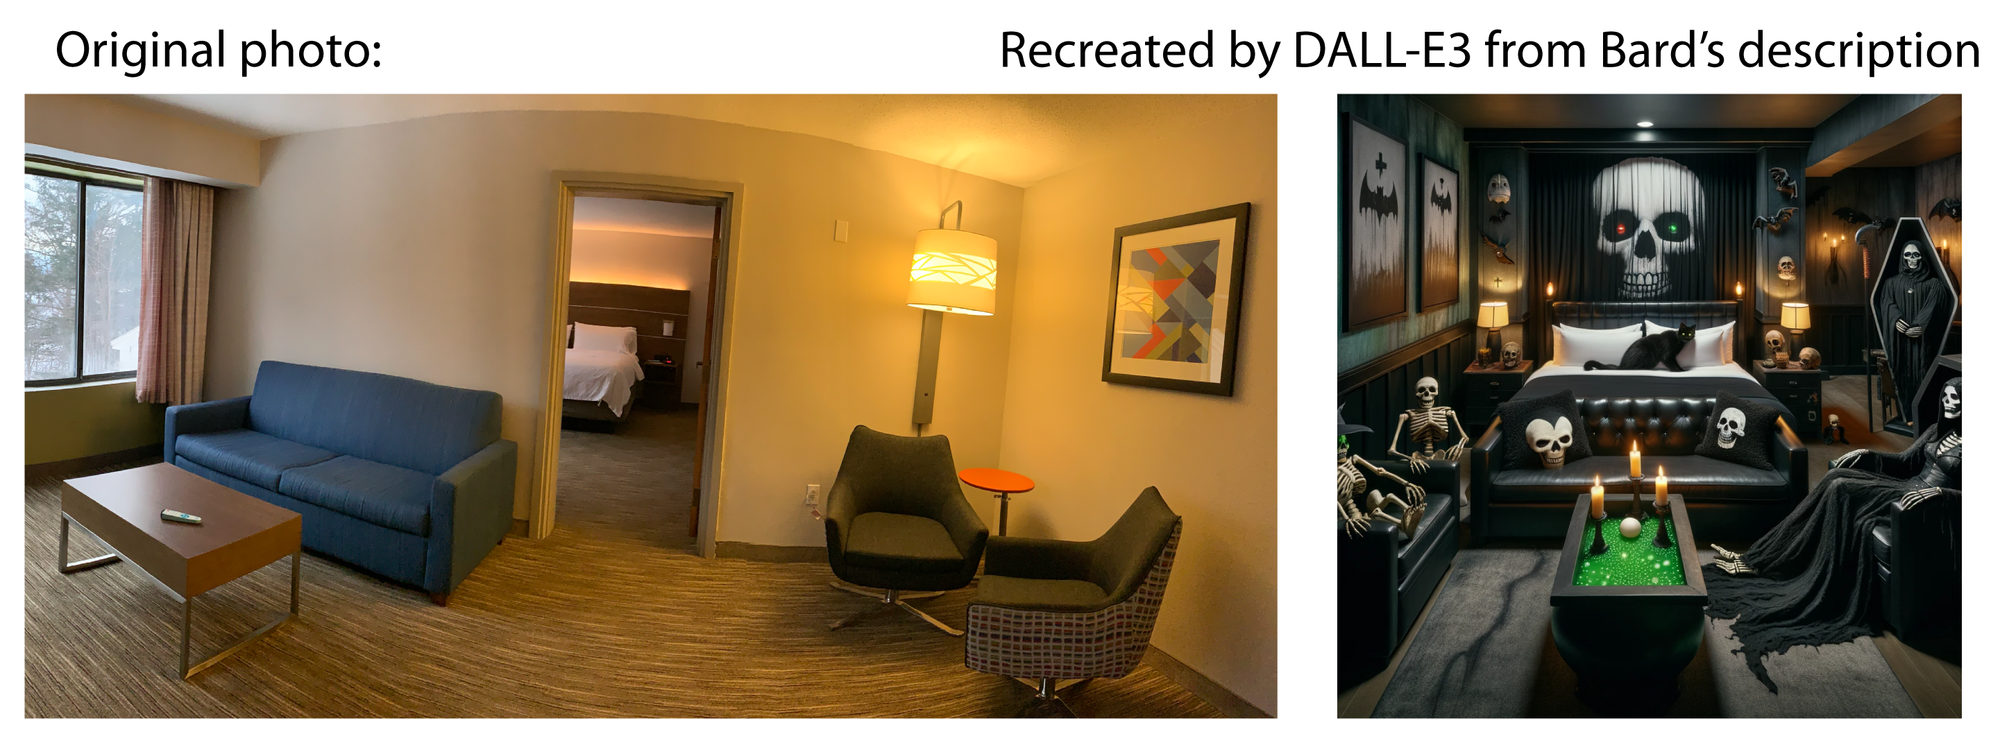 Left: Image of a simply decorated Holiday Inn suite with sofa, coffee table, two chairs, and part of a bed visible through a doorway. Right: A hotel bedroom as recreated by DALL-E3 from Bard's description. The coffee table is a cauldron, the cat is on the bed rather than the couch, and there are three skeletons sitting in chairs, only one of which is wearing a black robe, but otherwise it has most of the elements Bard described.